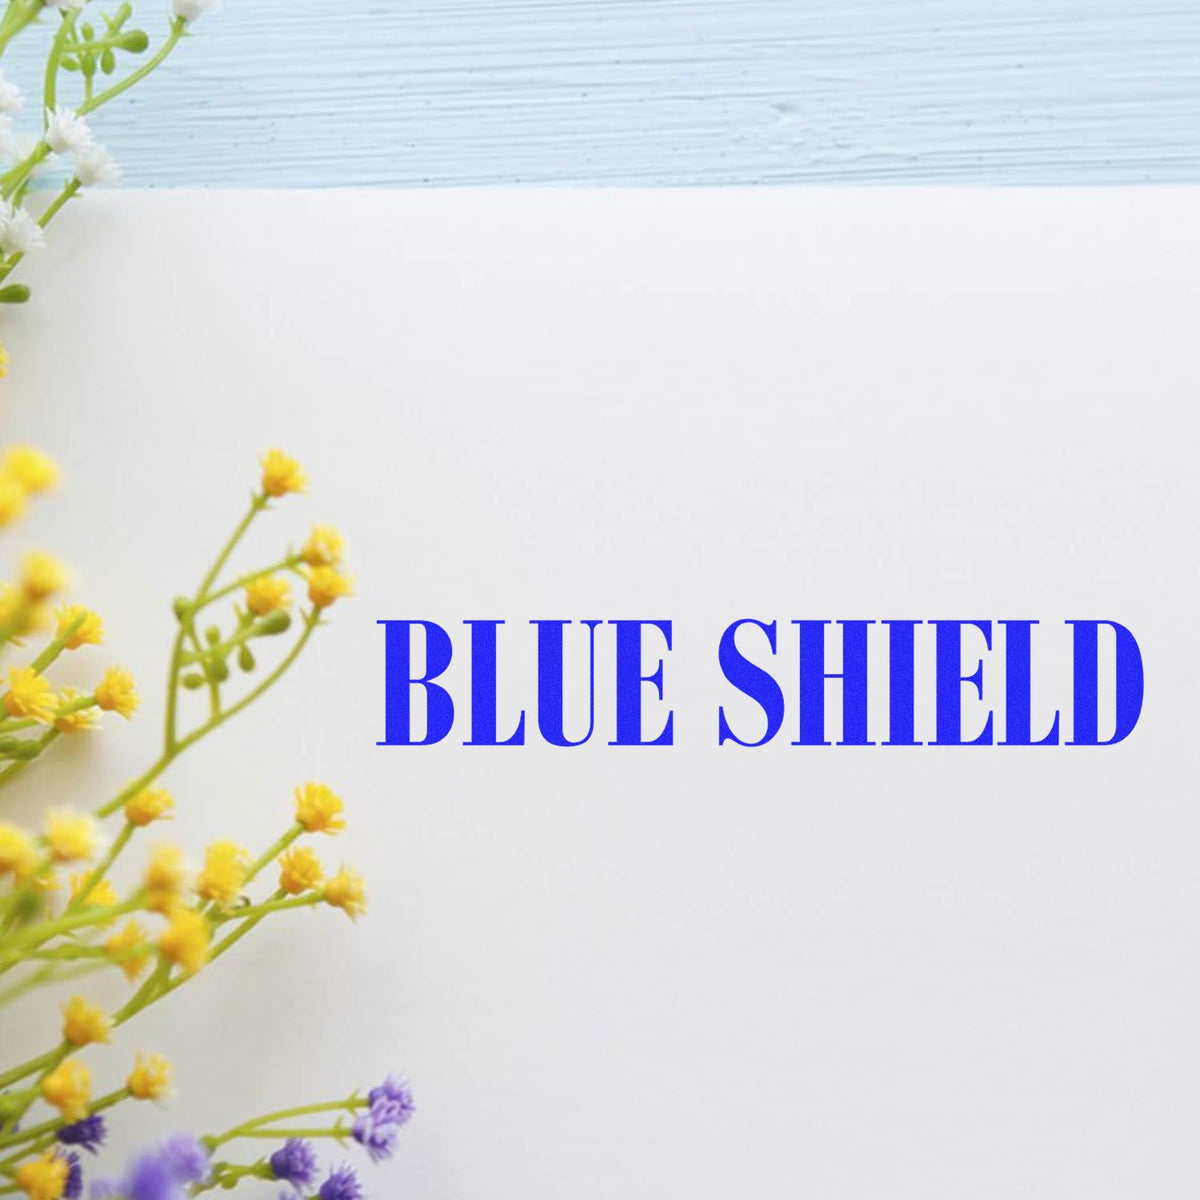 Blue Shield Rubber Stamp In Use Photo